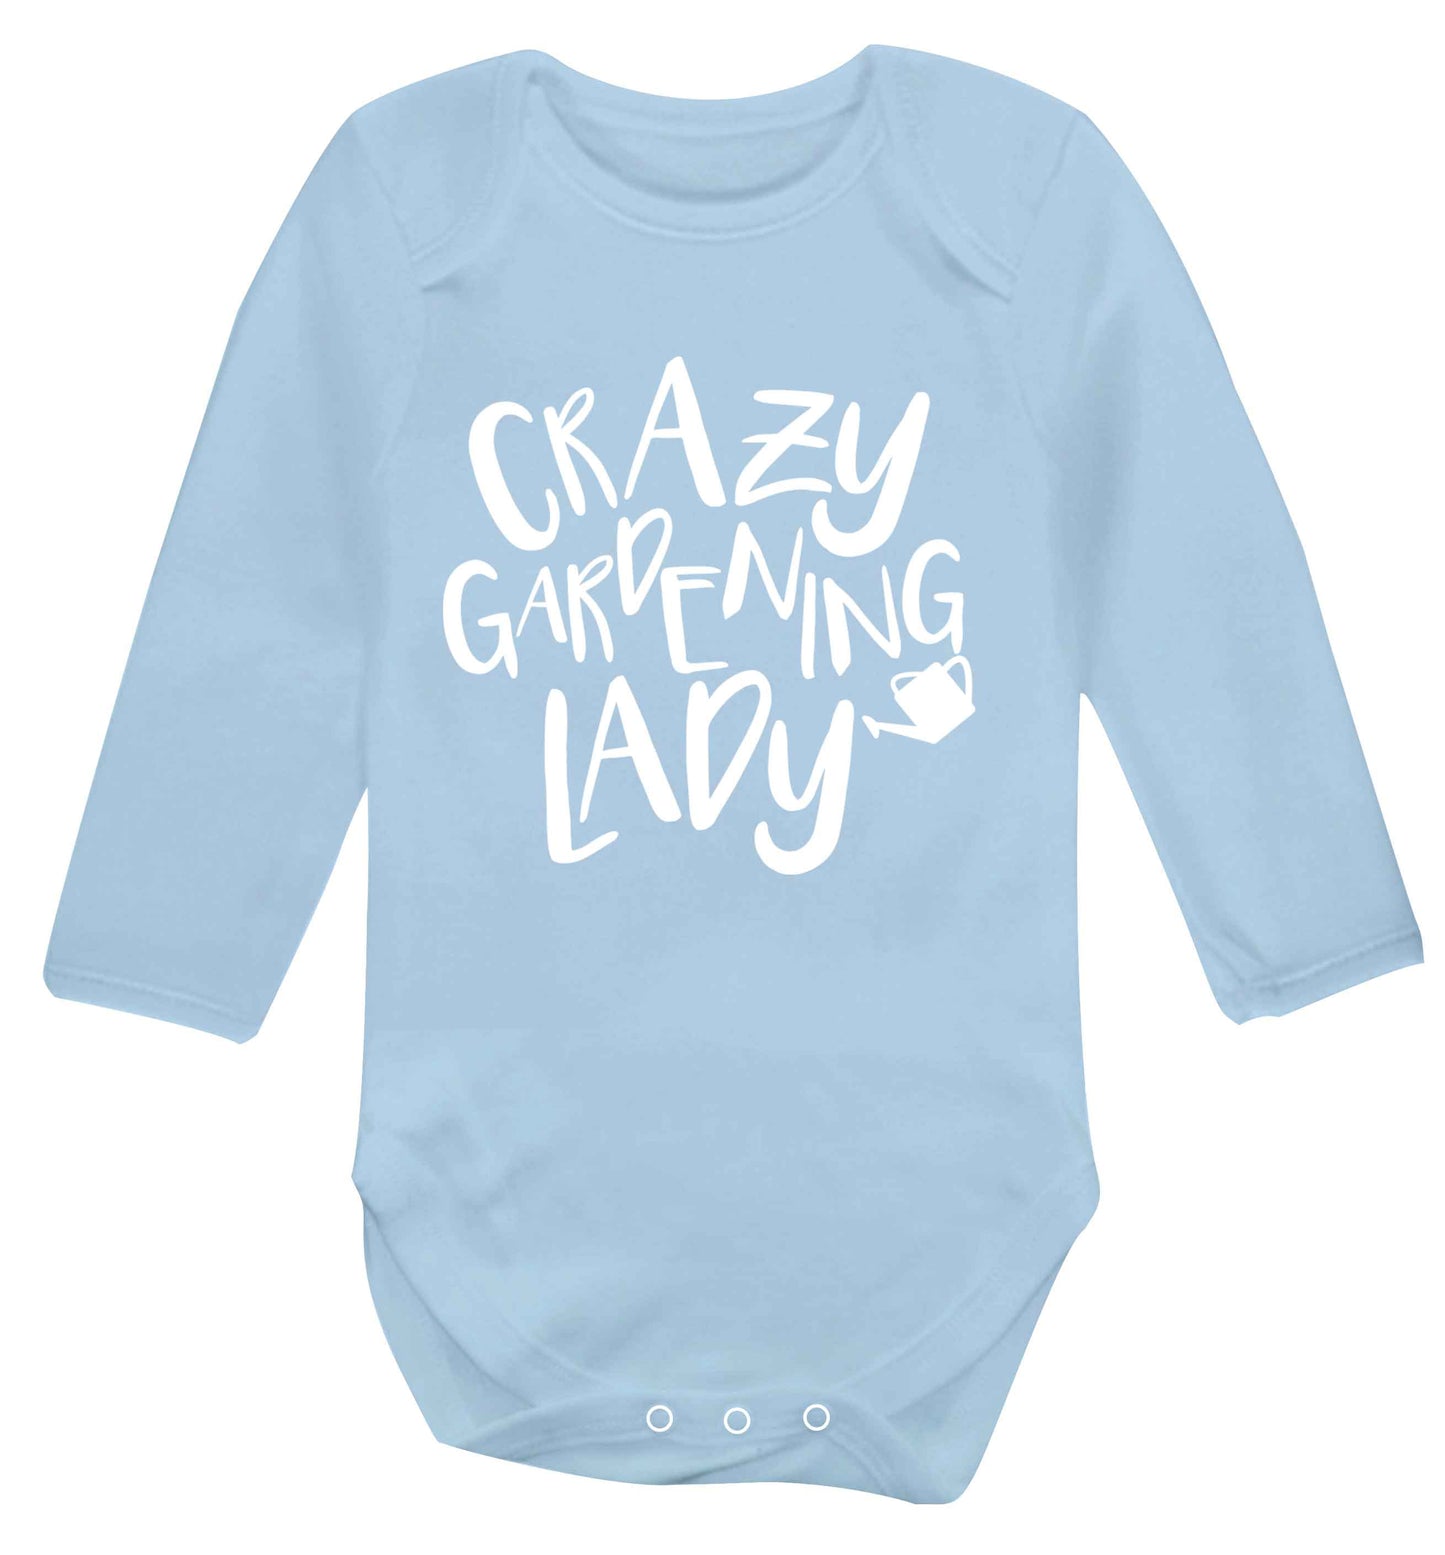 Crazy gardening lady Baby Vest long sleeved pale blue 6-12 months